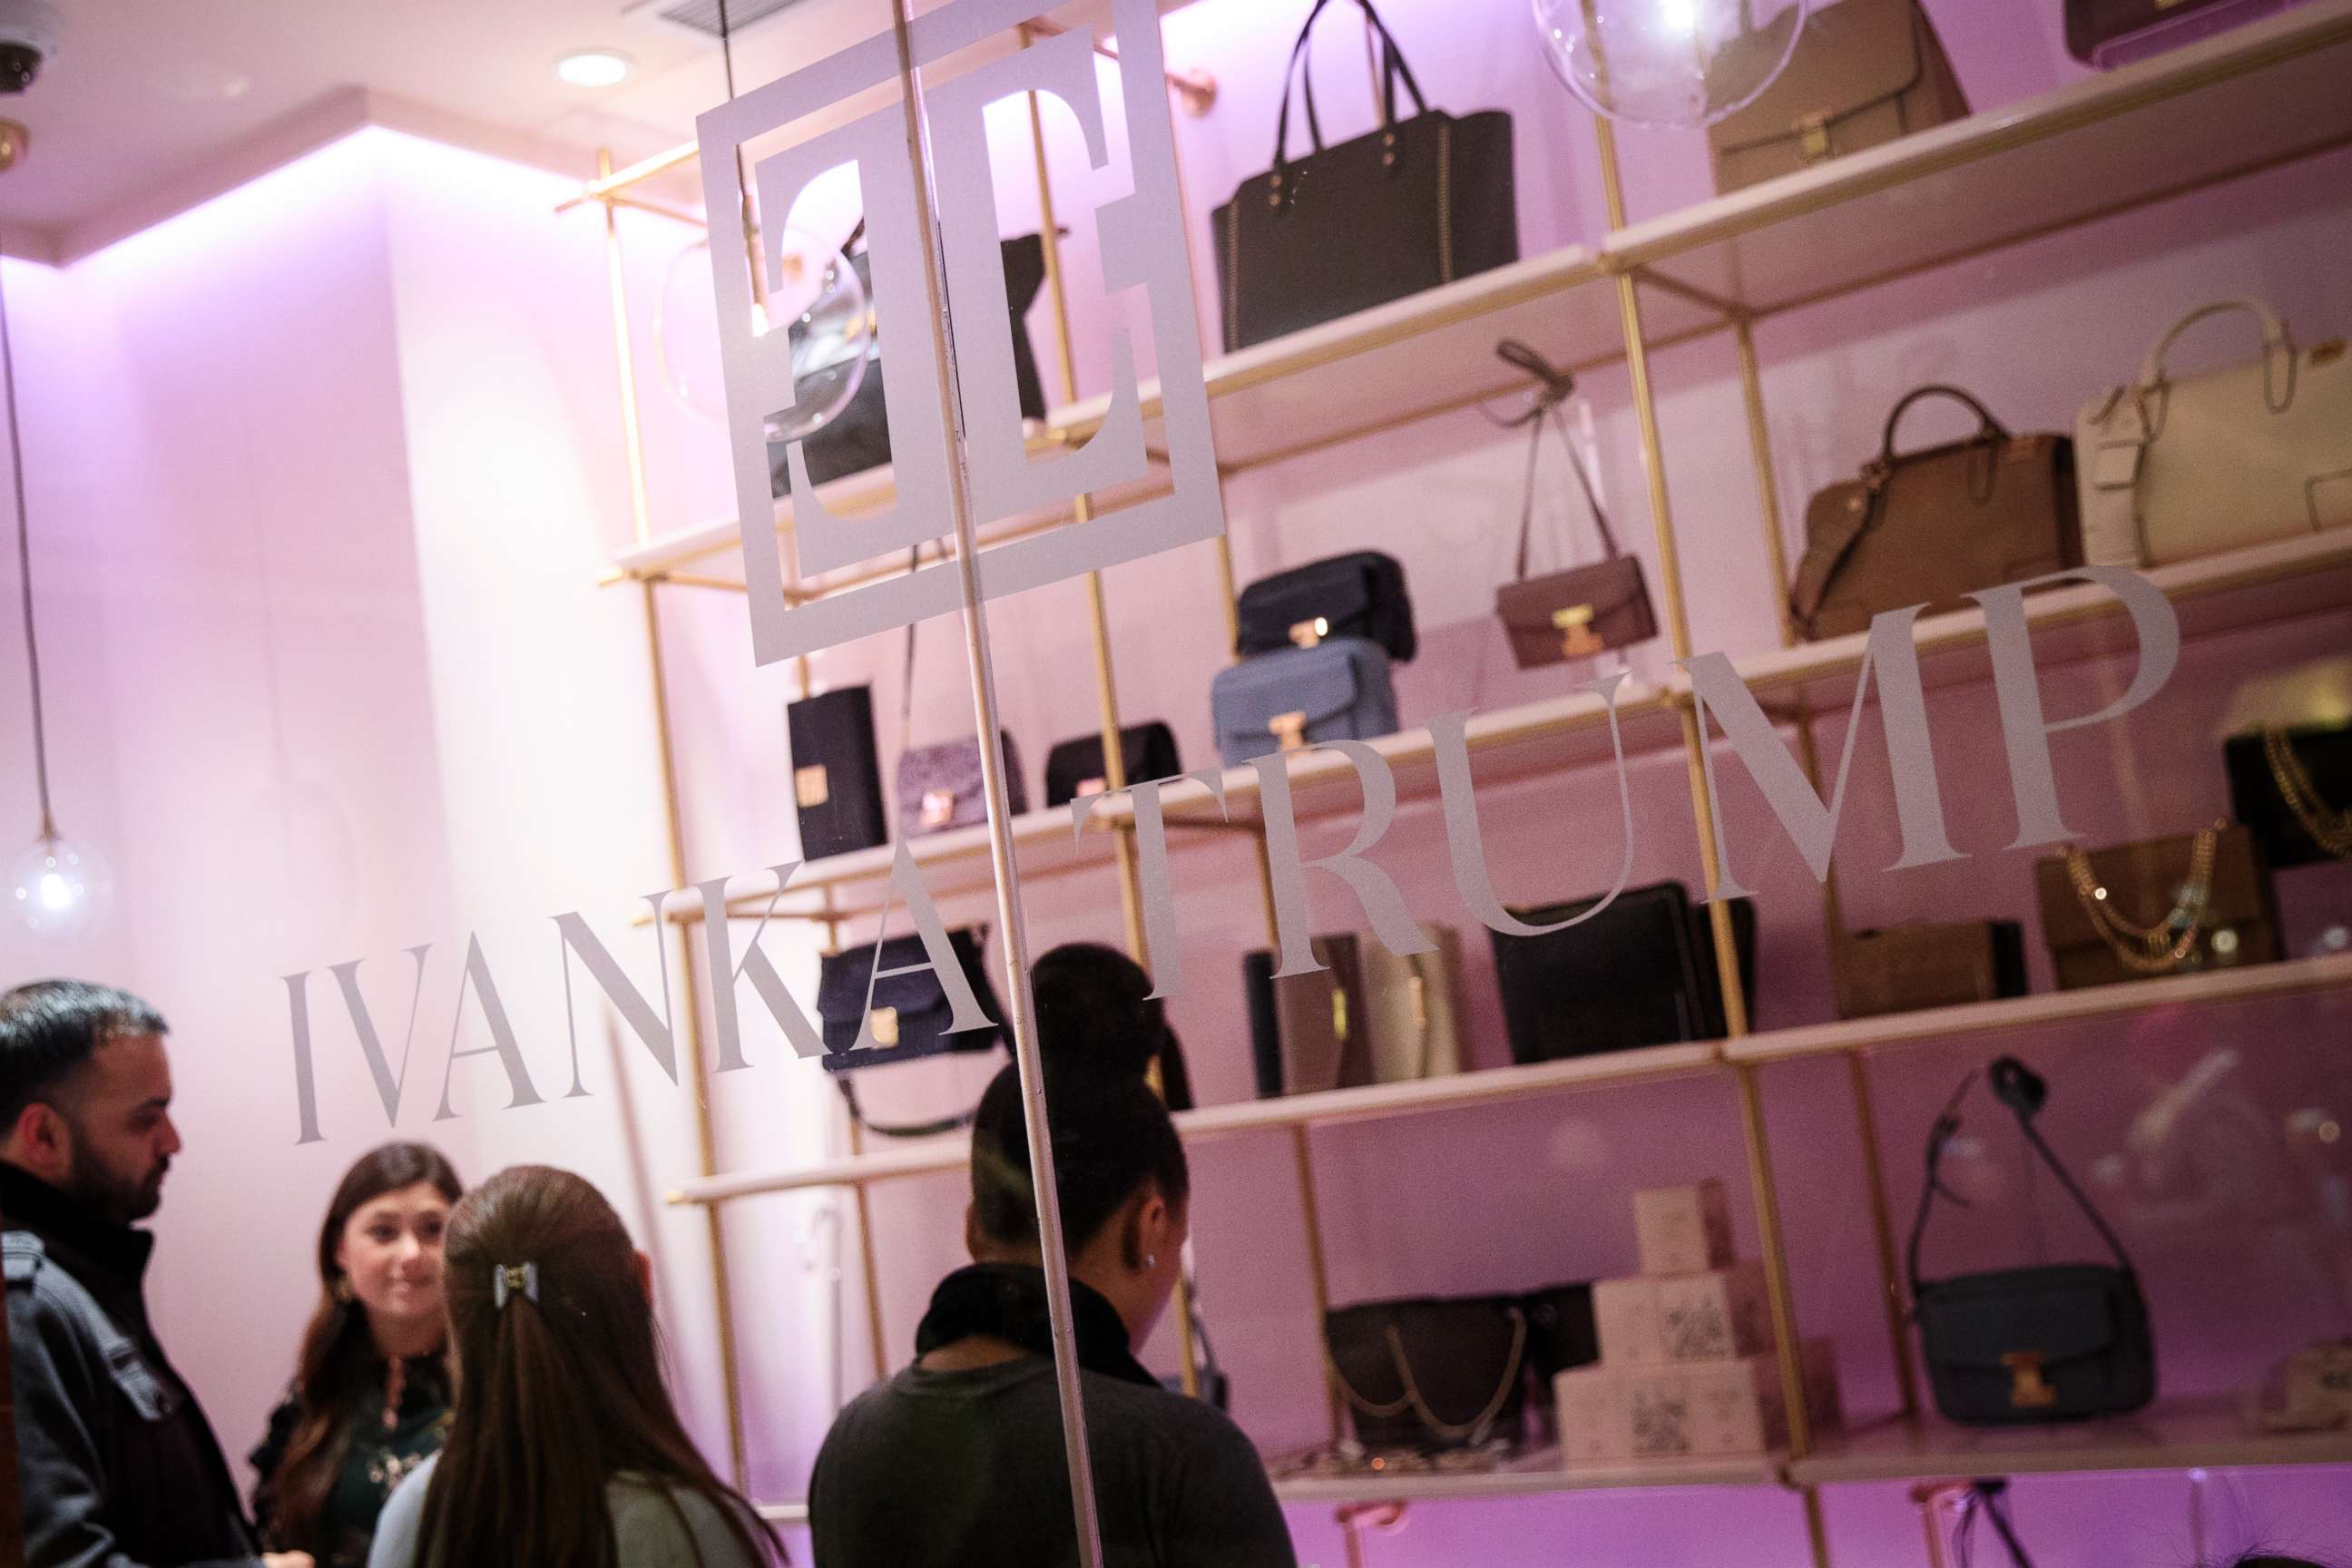 PHOTO: Customers shop at a new Ivanka Trump brand store in the lobby of Trump Tower, December 15, 2017 in New York City.